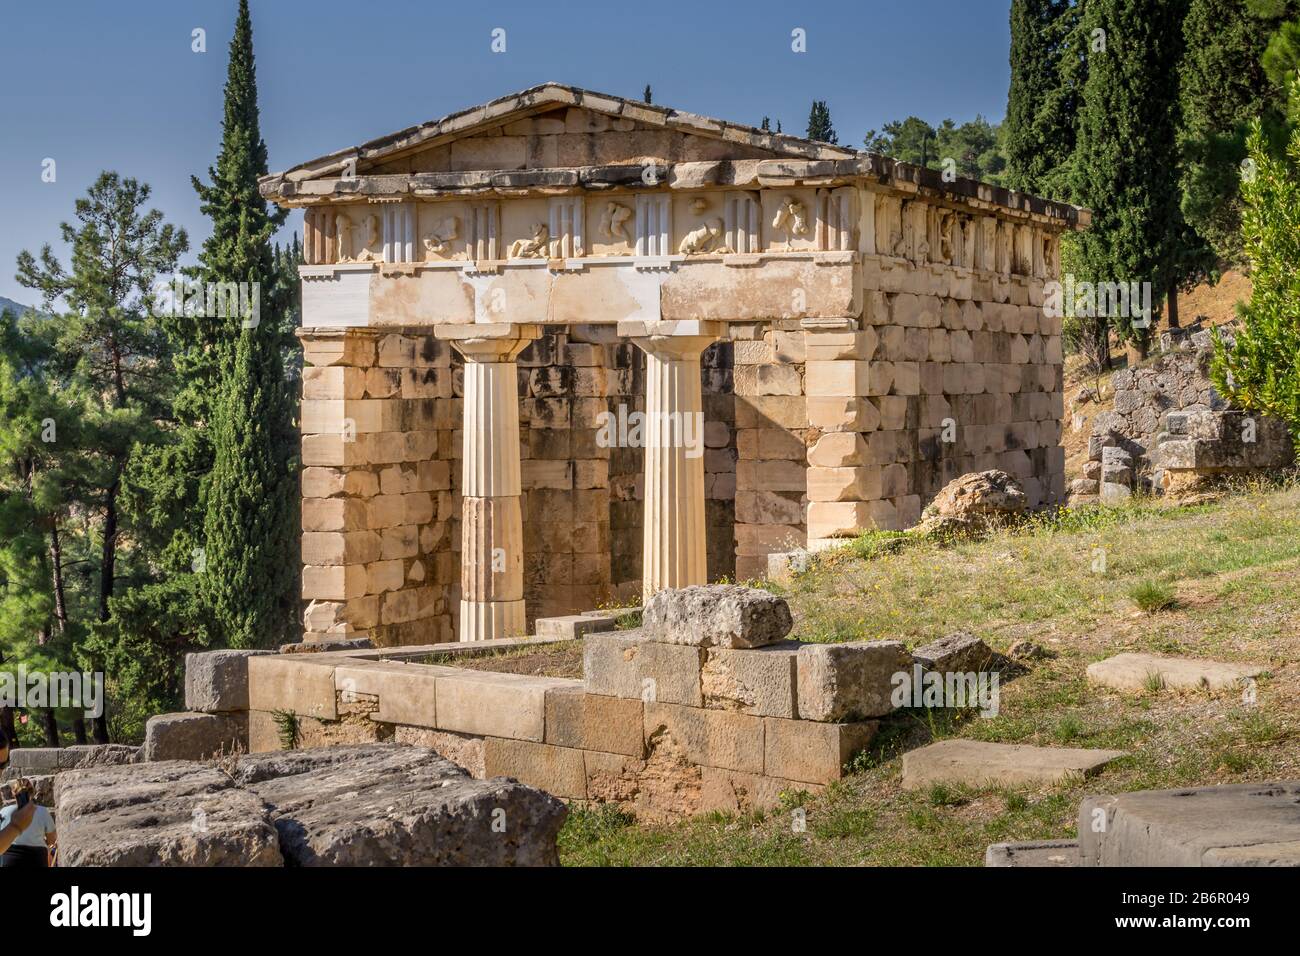 Reconstructed Athenian Treasury with doric columns and stone block construction at Delphi in Greece. Stock Photo